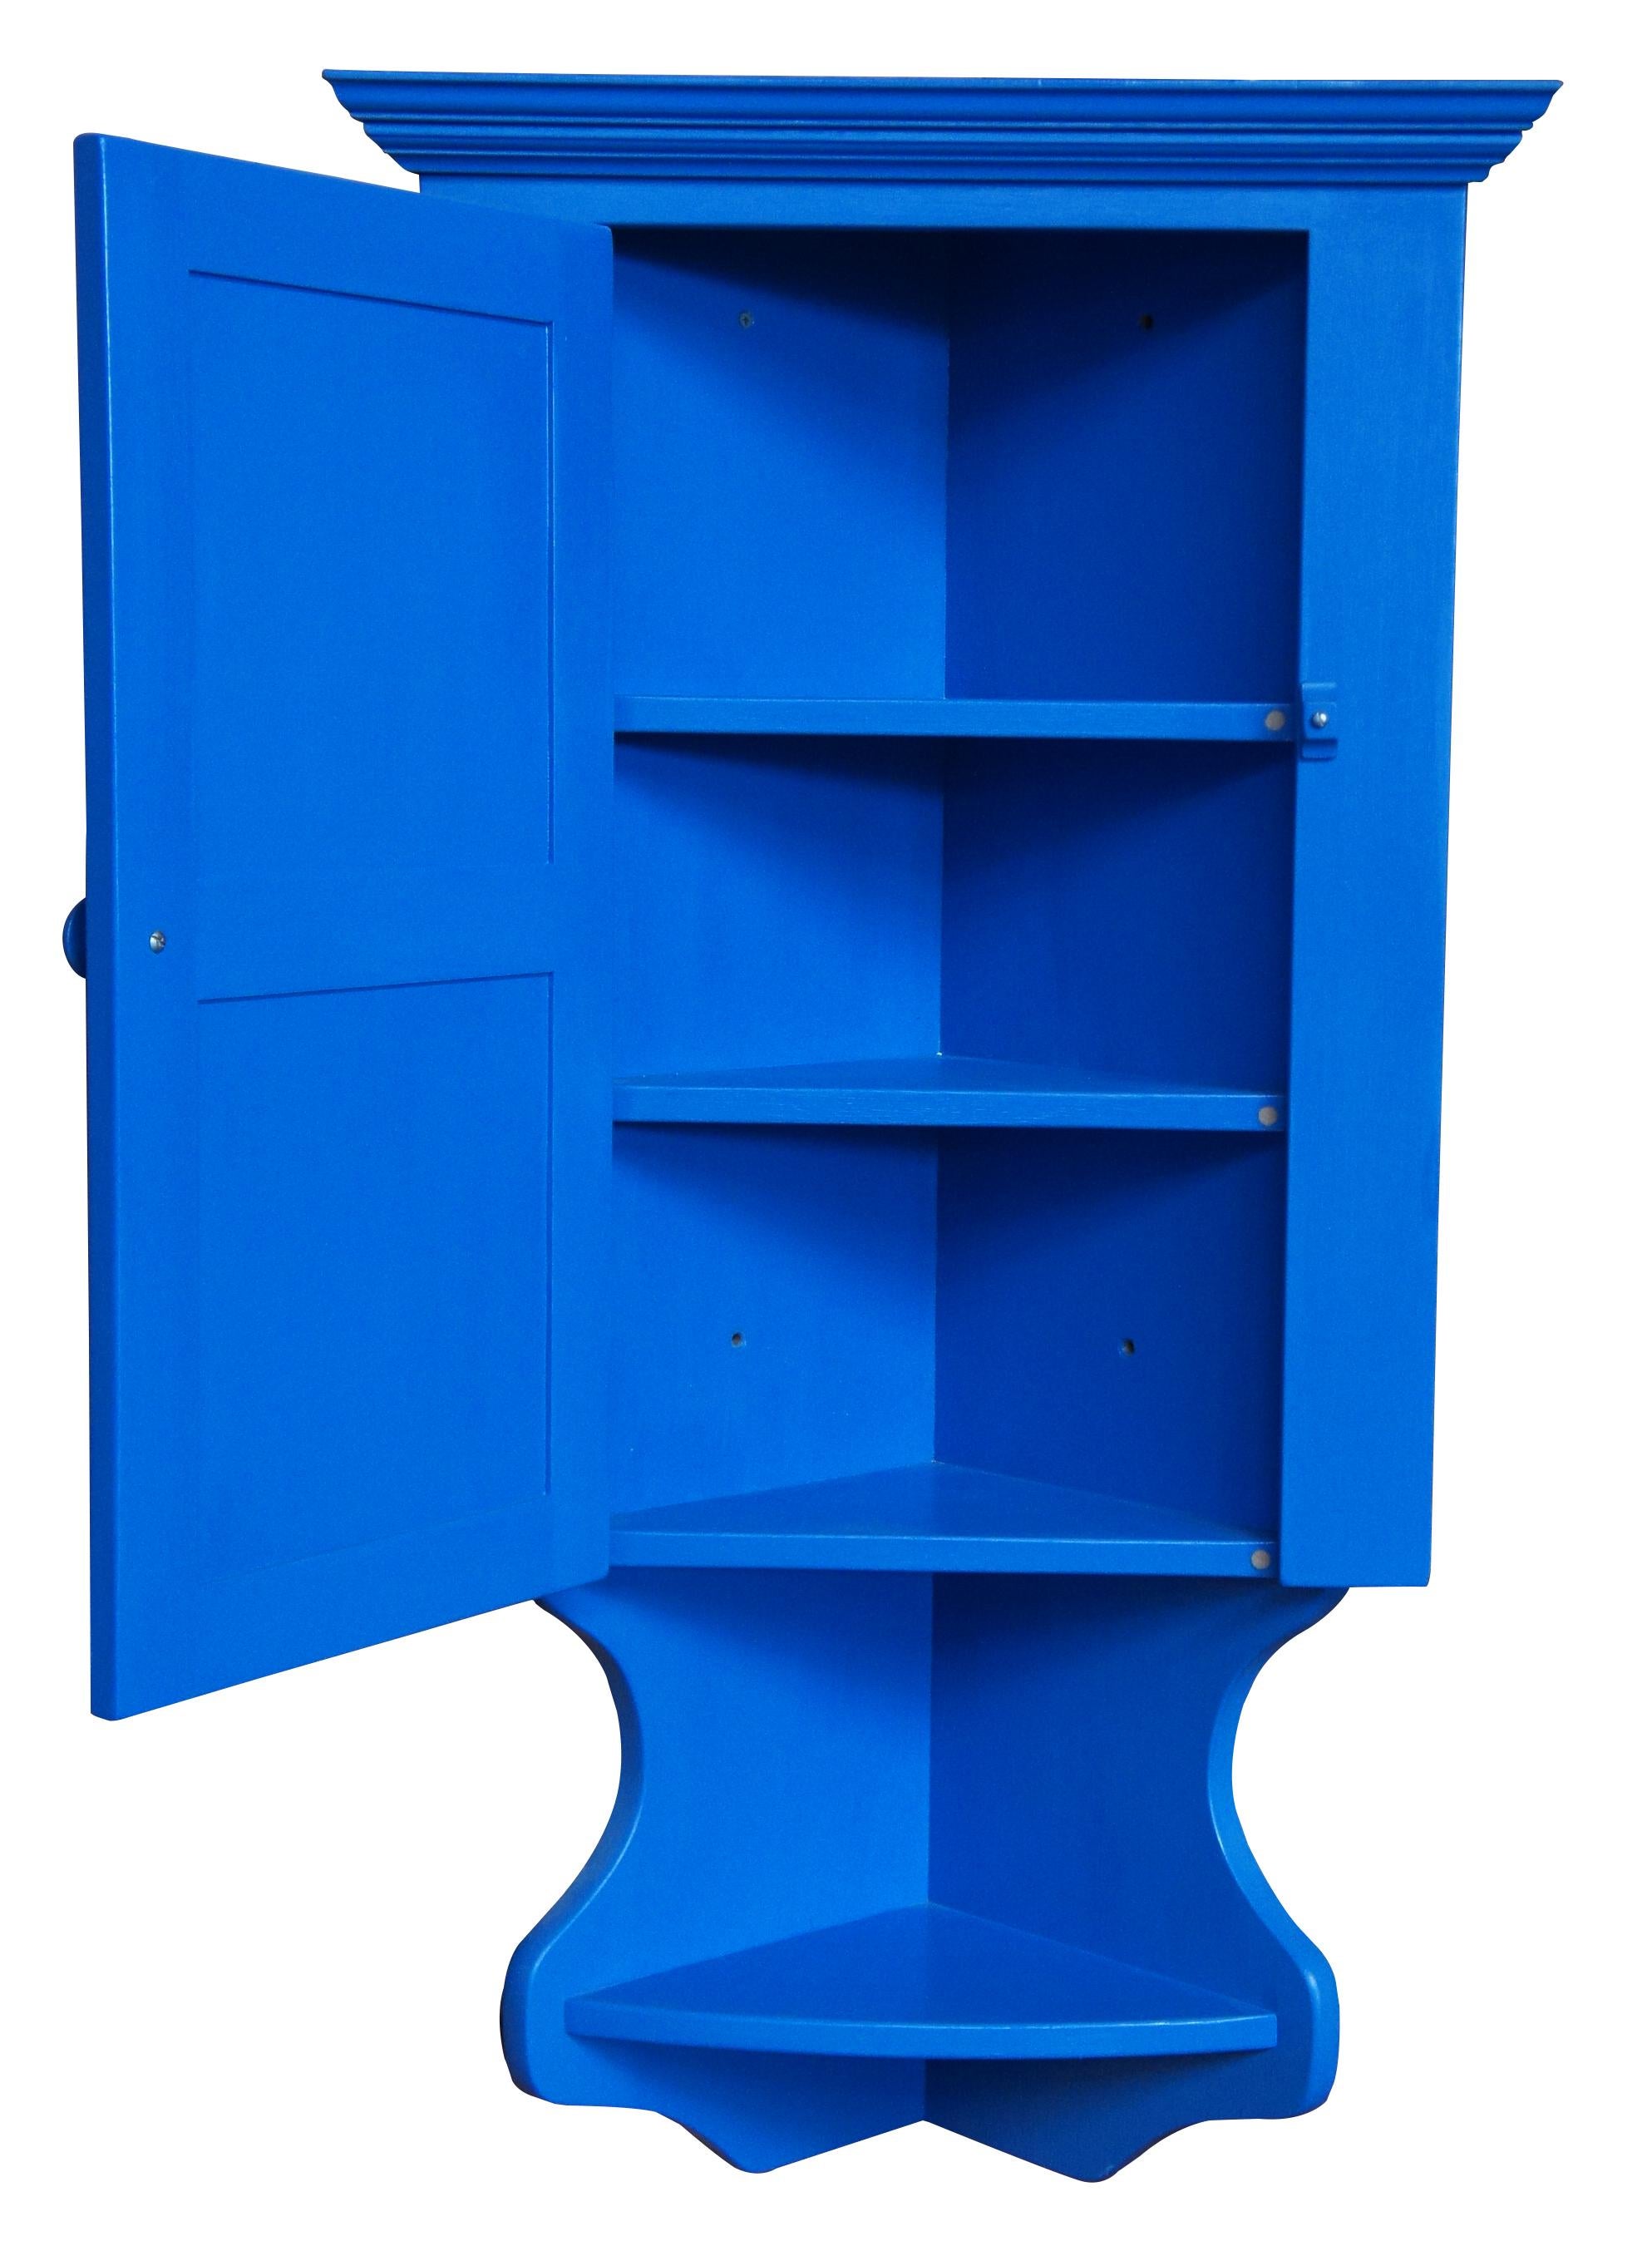 Vintage Roscoe Village Early American style wall hanging corner cabinet featuring a paneled door with tiered shelving and painted in an electric blue finish.

Measures: 23.5